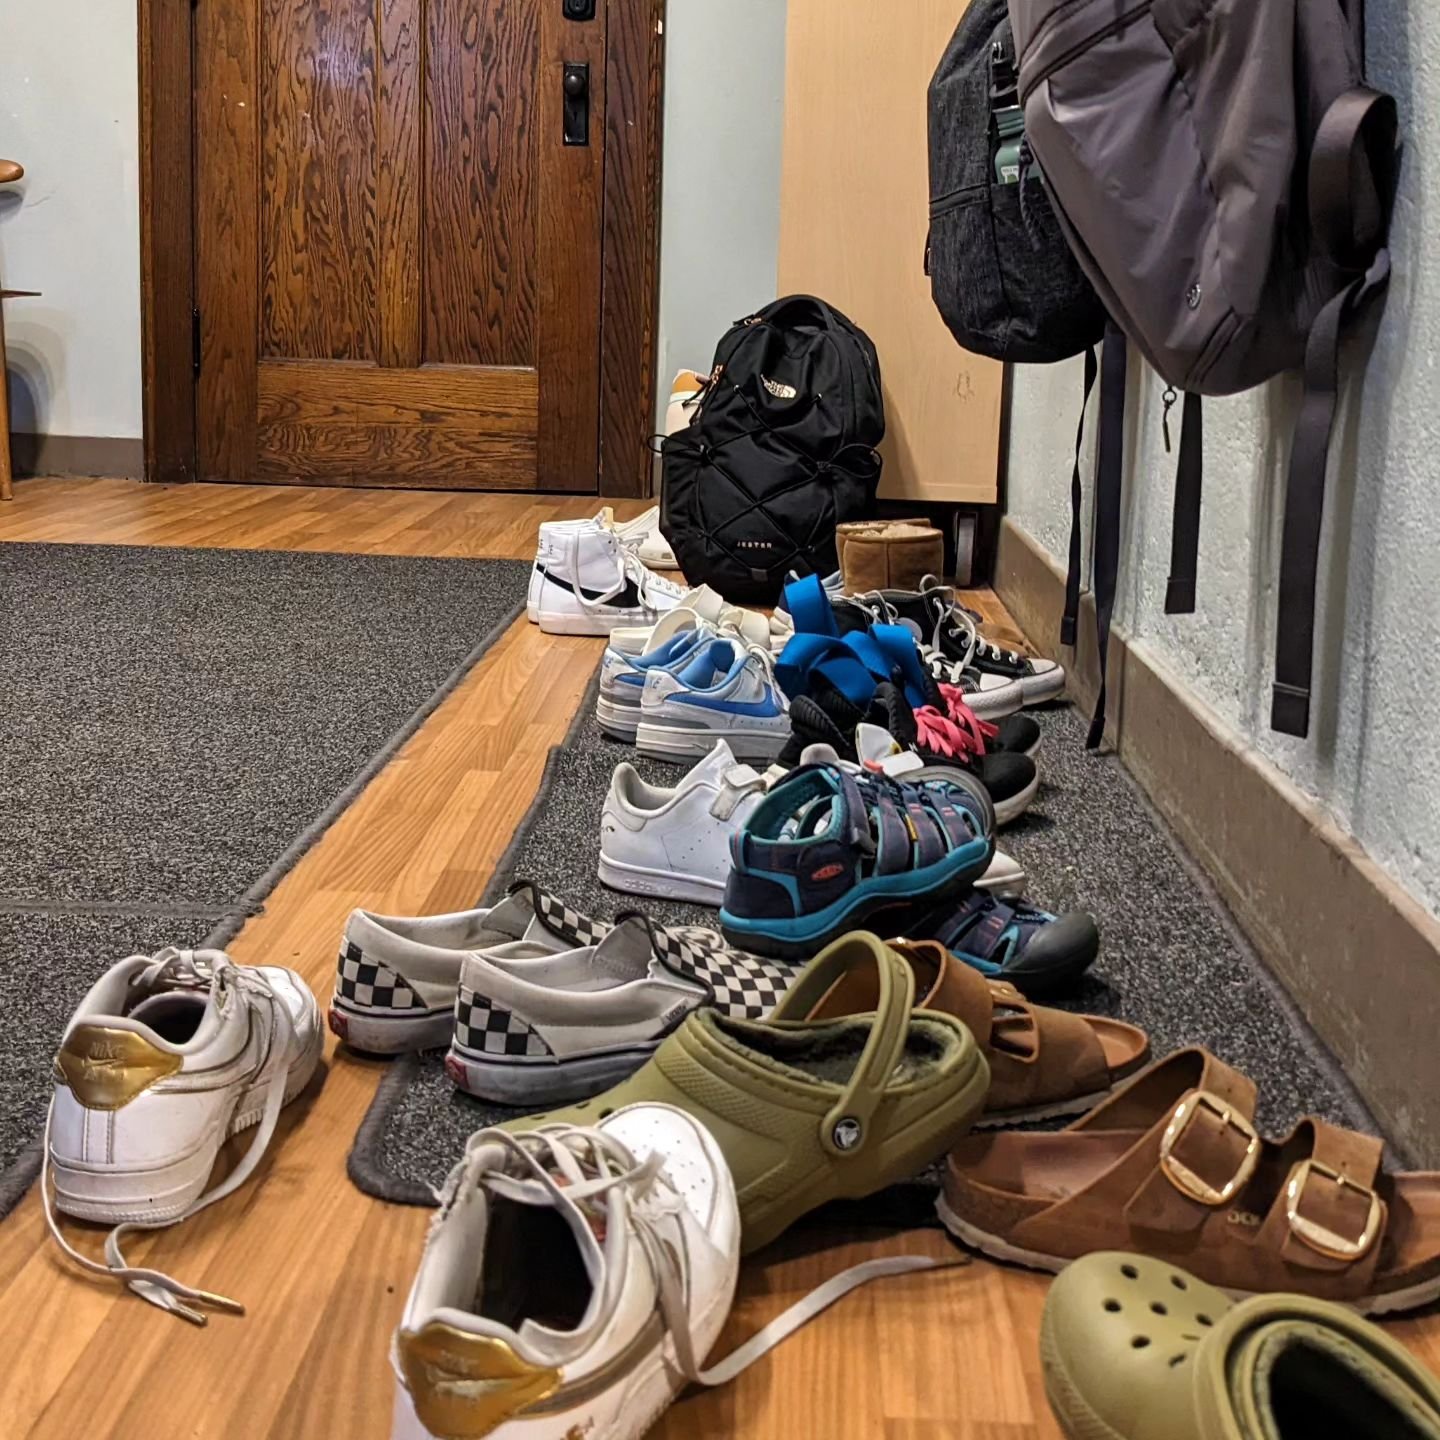 When youth are in the studio the piles of shoes look different. 💛

Gold, glitter, or neon shoes kicked off into piles as backpacks are hung after a long day at school. Giggles can be heard from inside the studio as they come into a safe youth curate